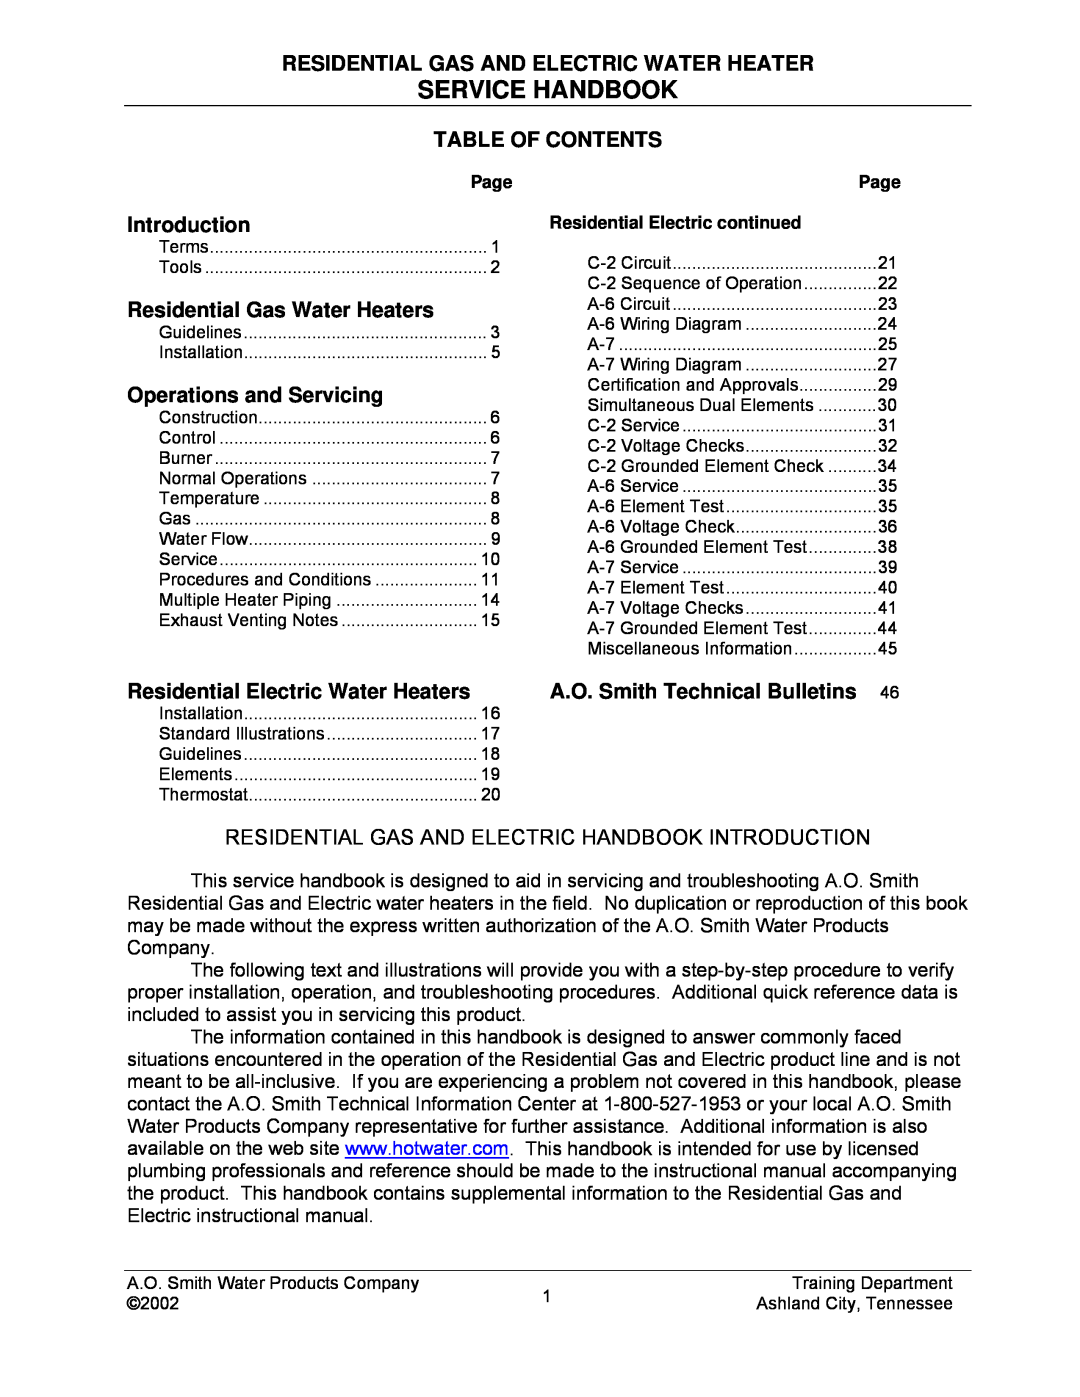 A.O. Smith TC-049-R2 manual Service Handbook, Residential Gas And Electric Water Heater, Table Of Contents, Introduction 